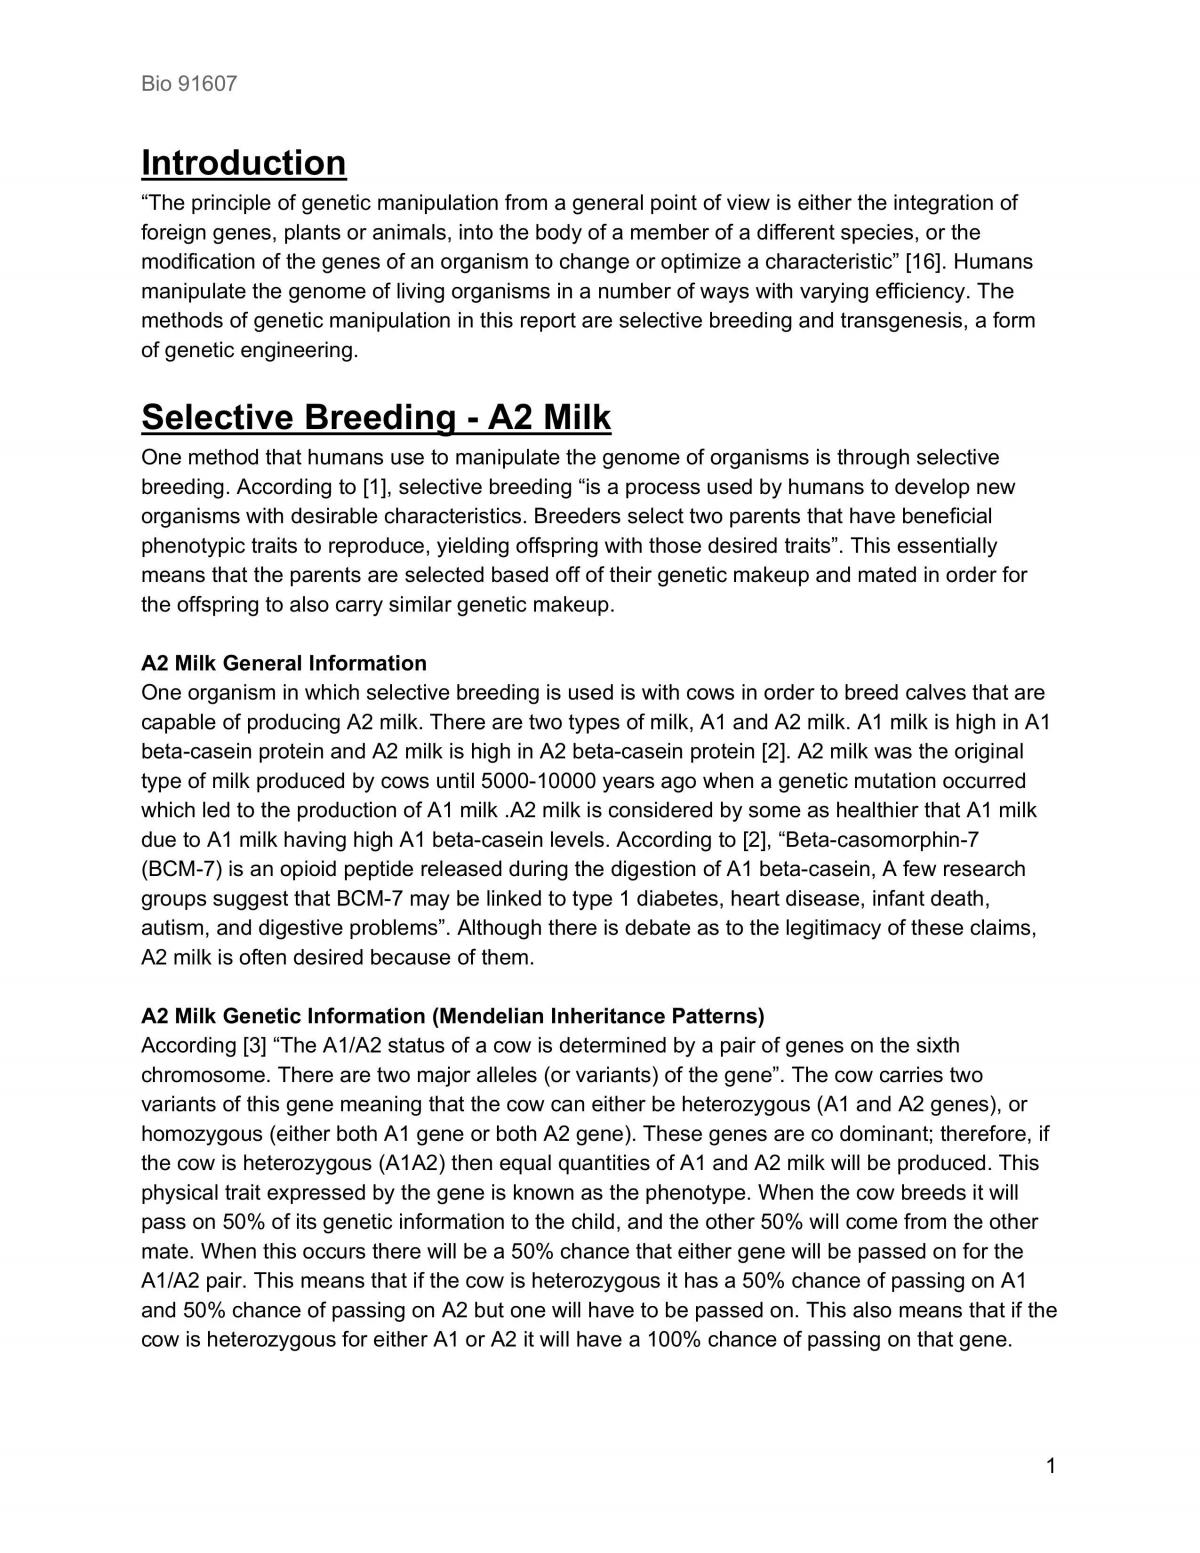 Essay discussing selective breeding methods and examples - Page 1